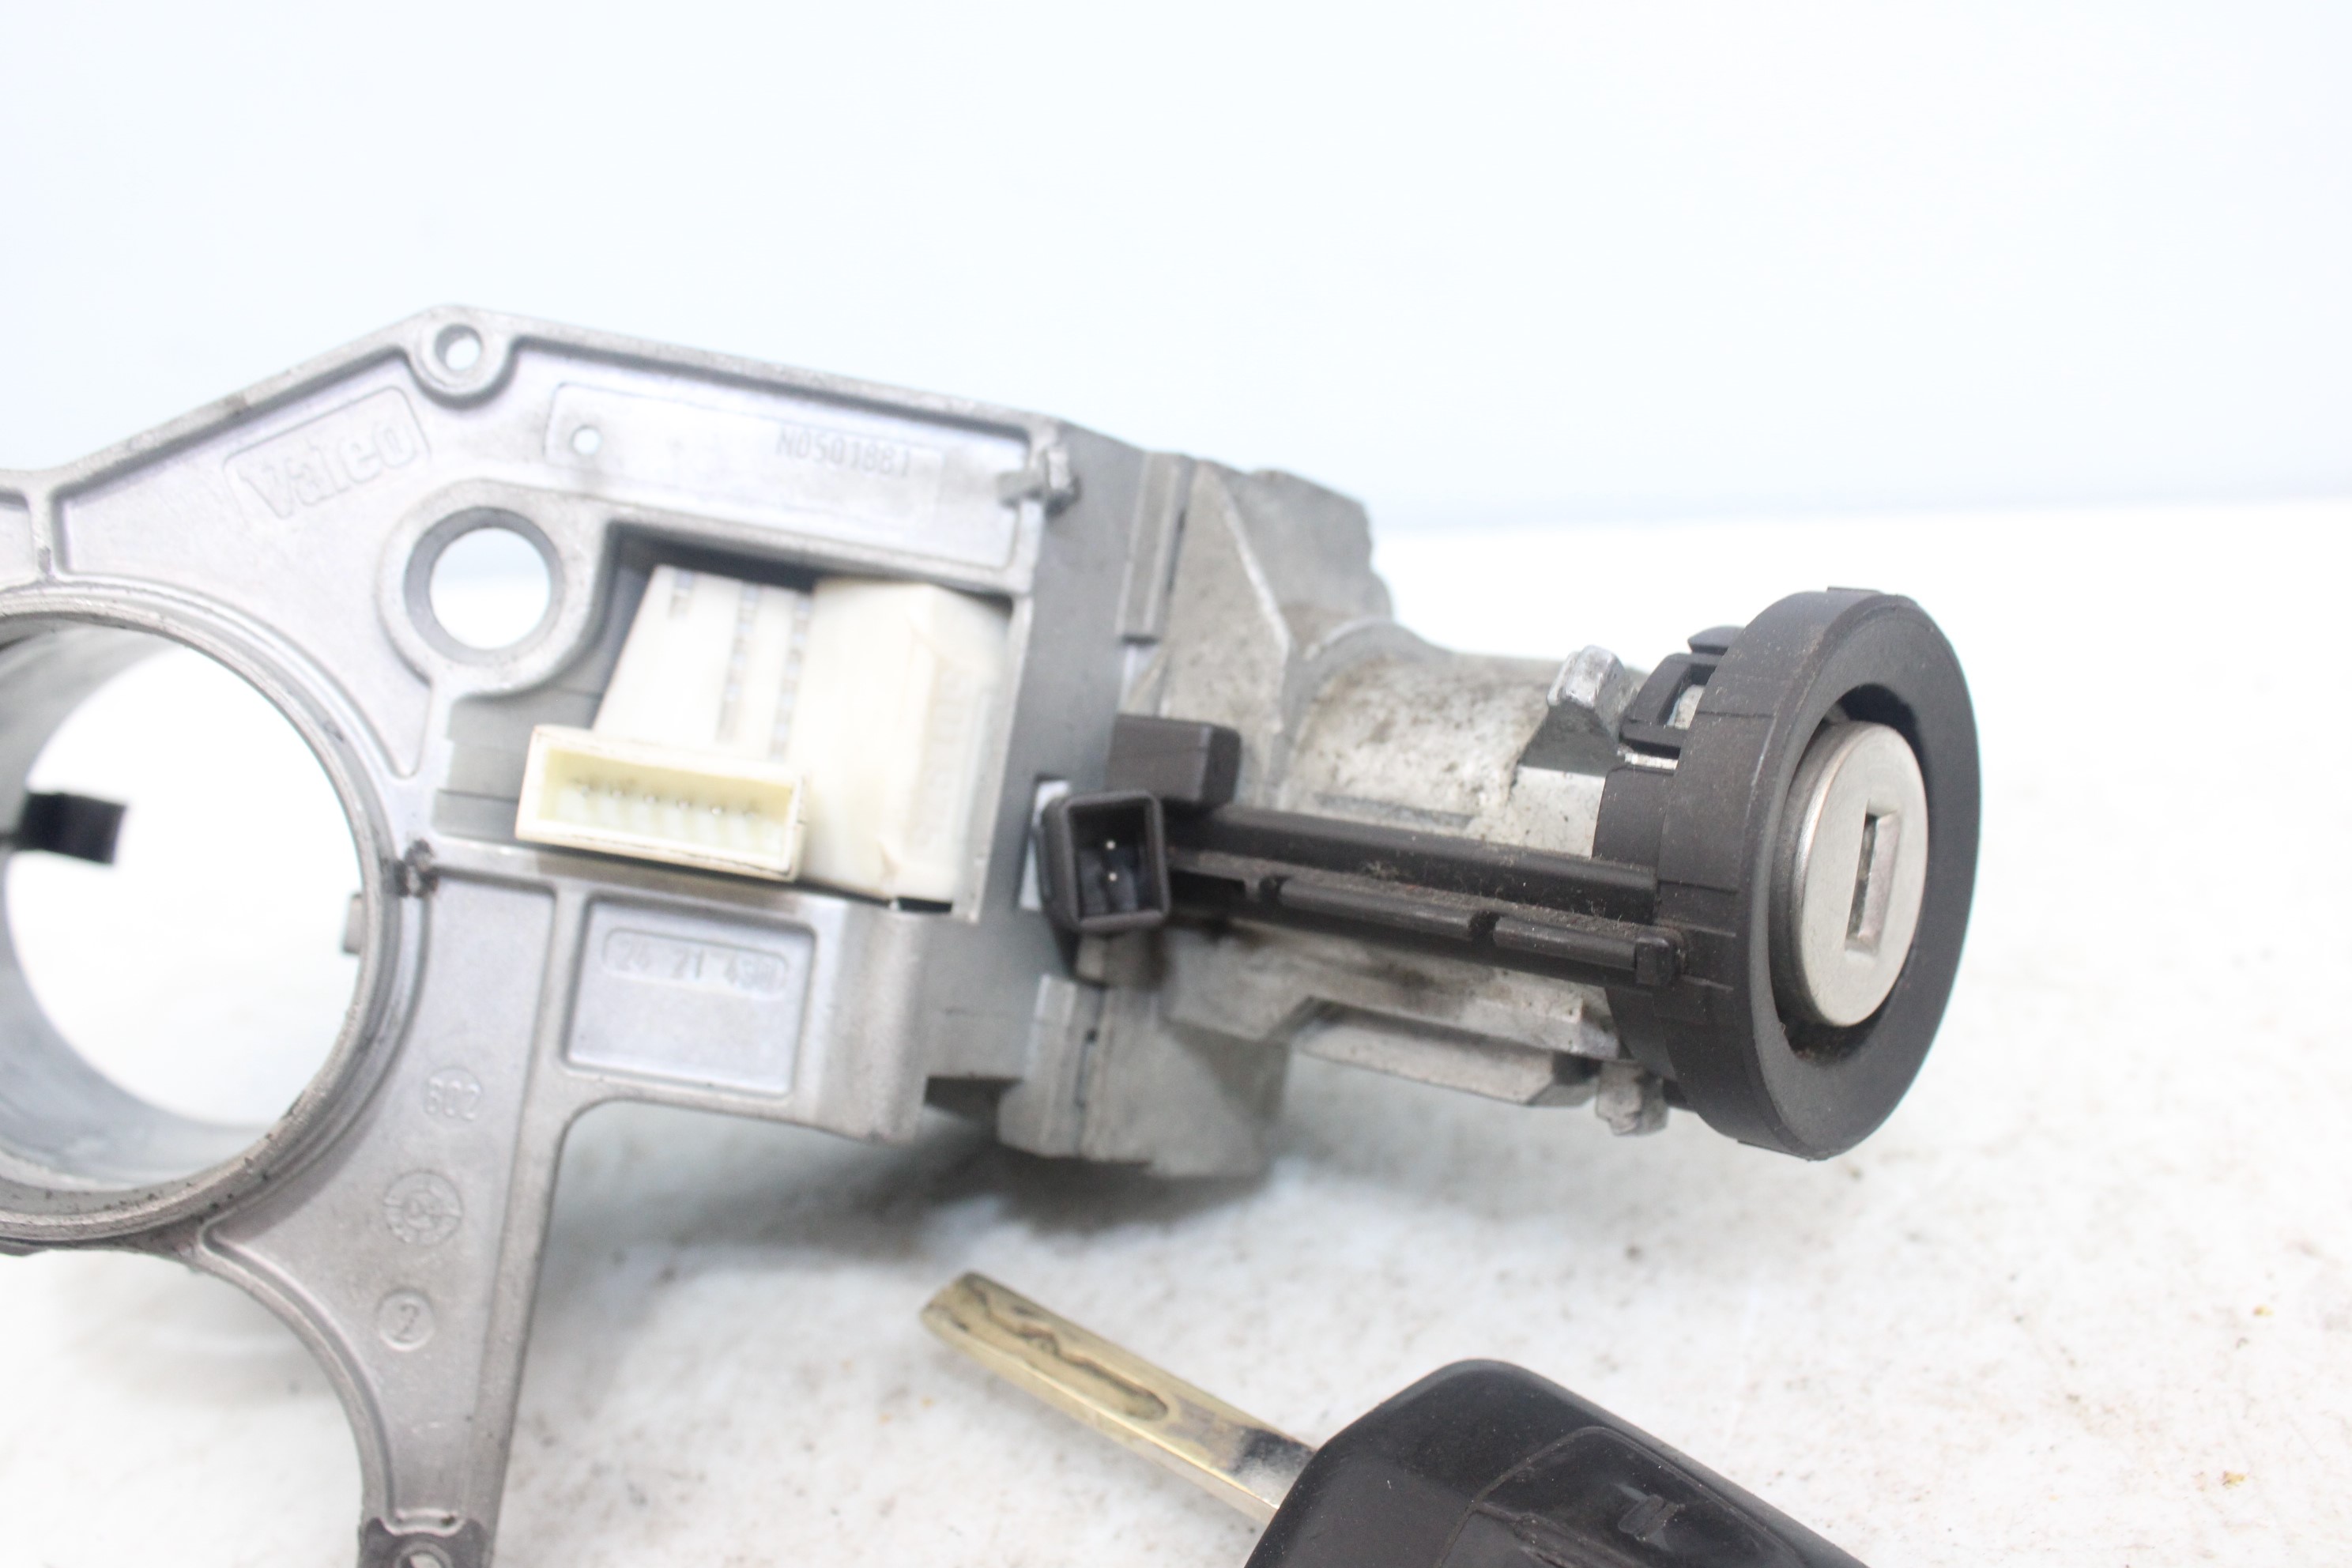 OPEL Astra H (2004-2014) Ignition Lock N0501881 25180035